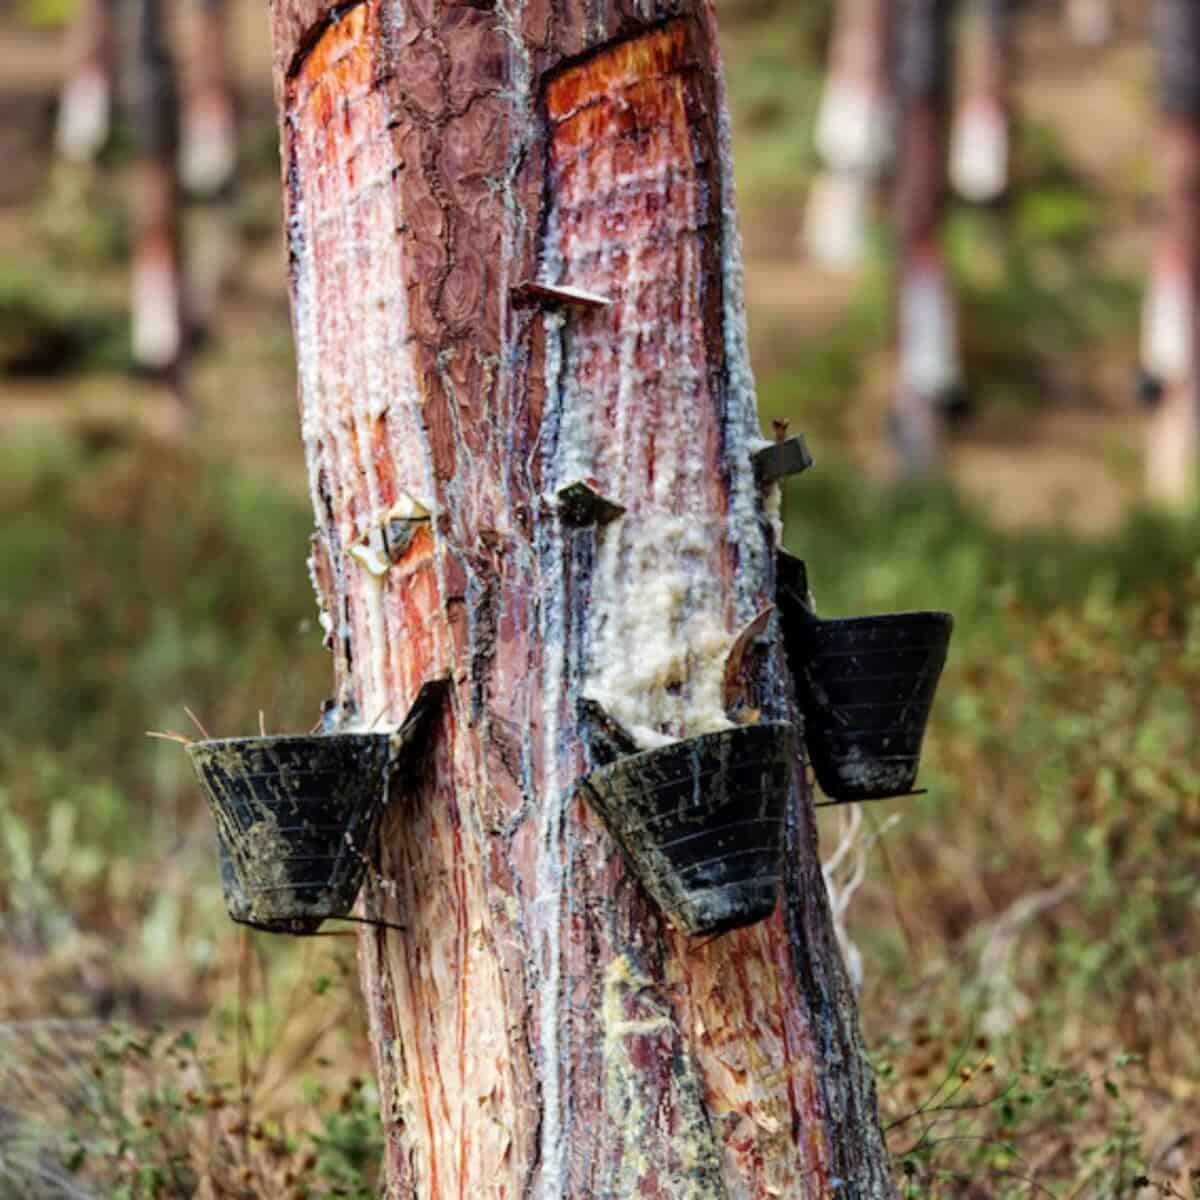 small buckets gather the pine gum that came from the cuts